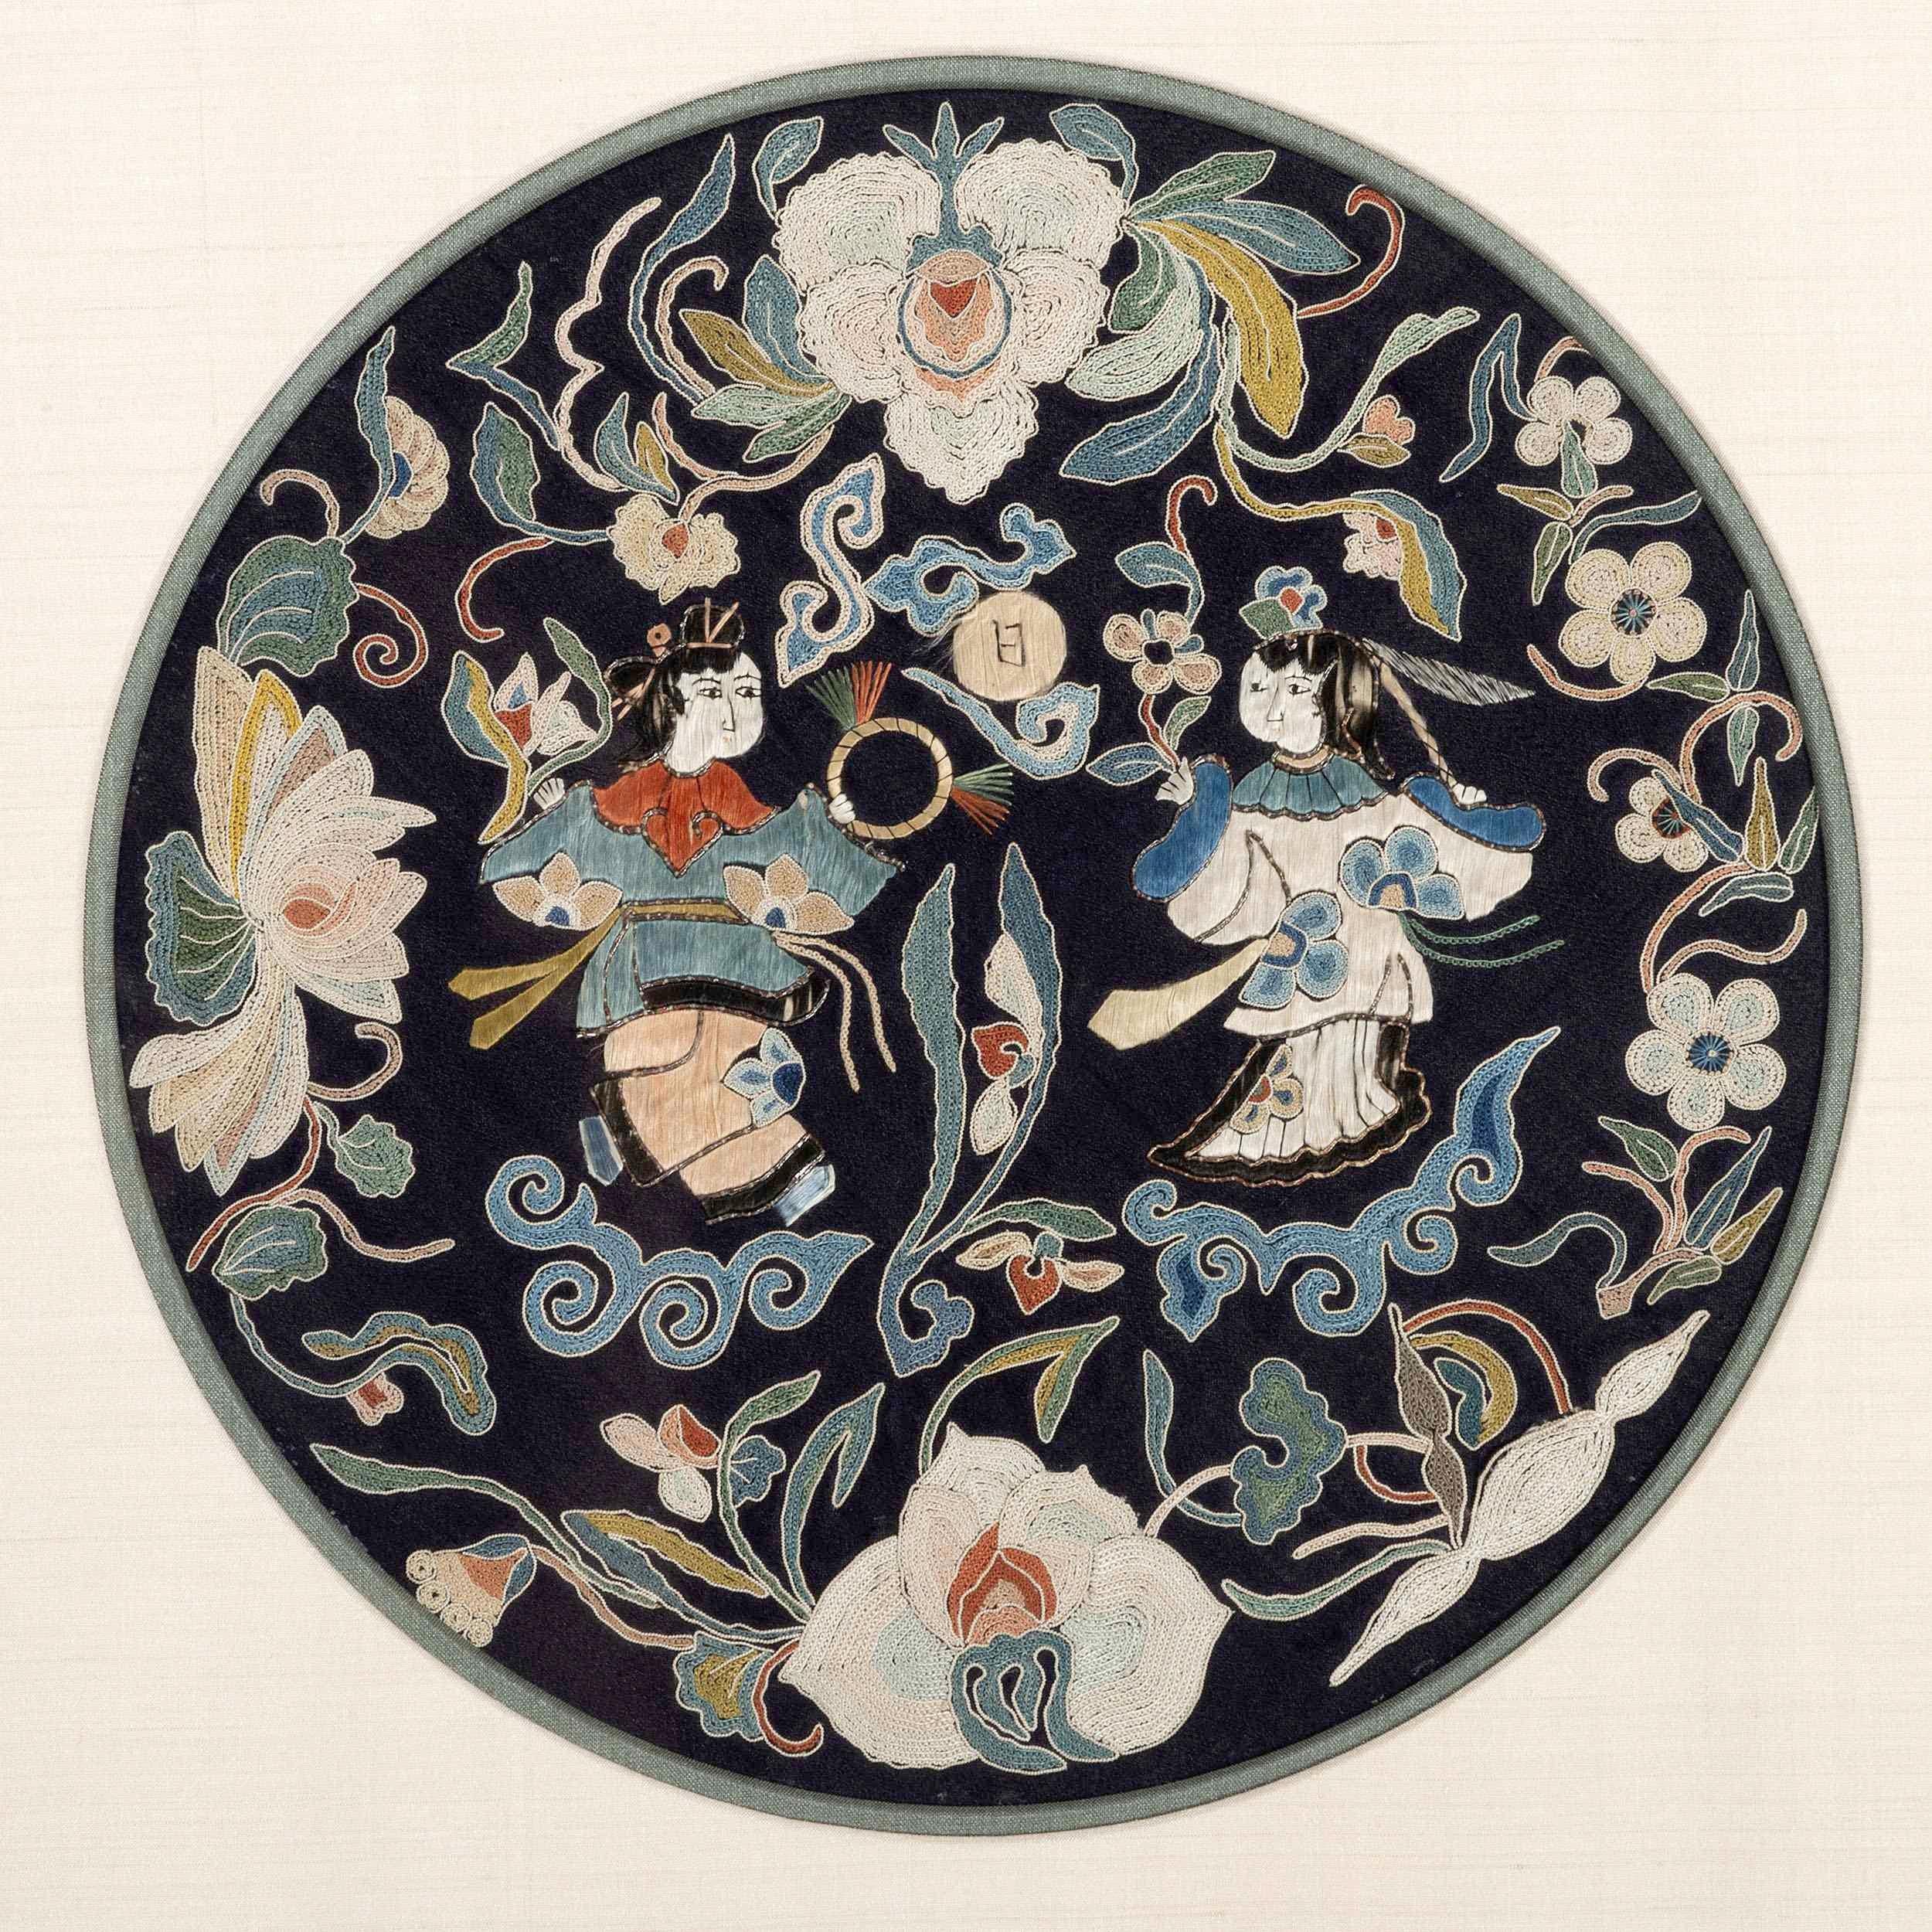 A Chinese antique embroidery presented in a museum quality frame, originally purchased from Galerie Du Monde in Hongkong. Originally, the textile was a roundel design likely from the center front of a noble woman's robe and it is dated to Qing